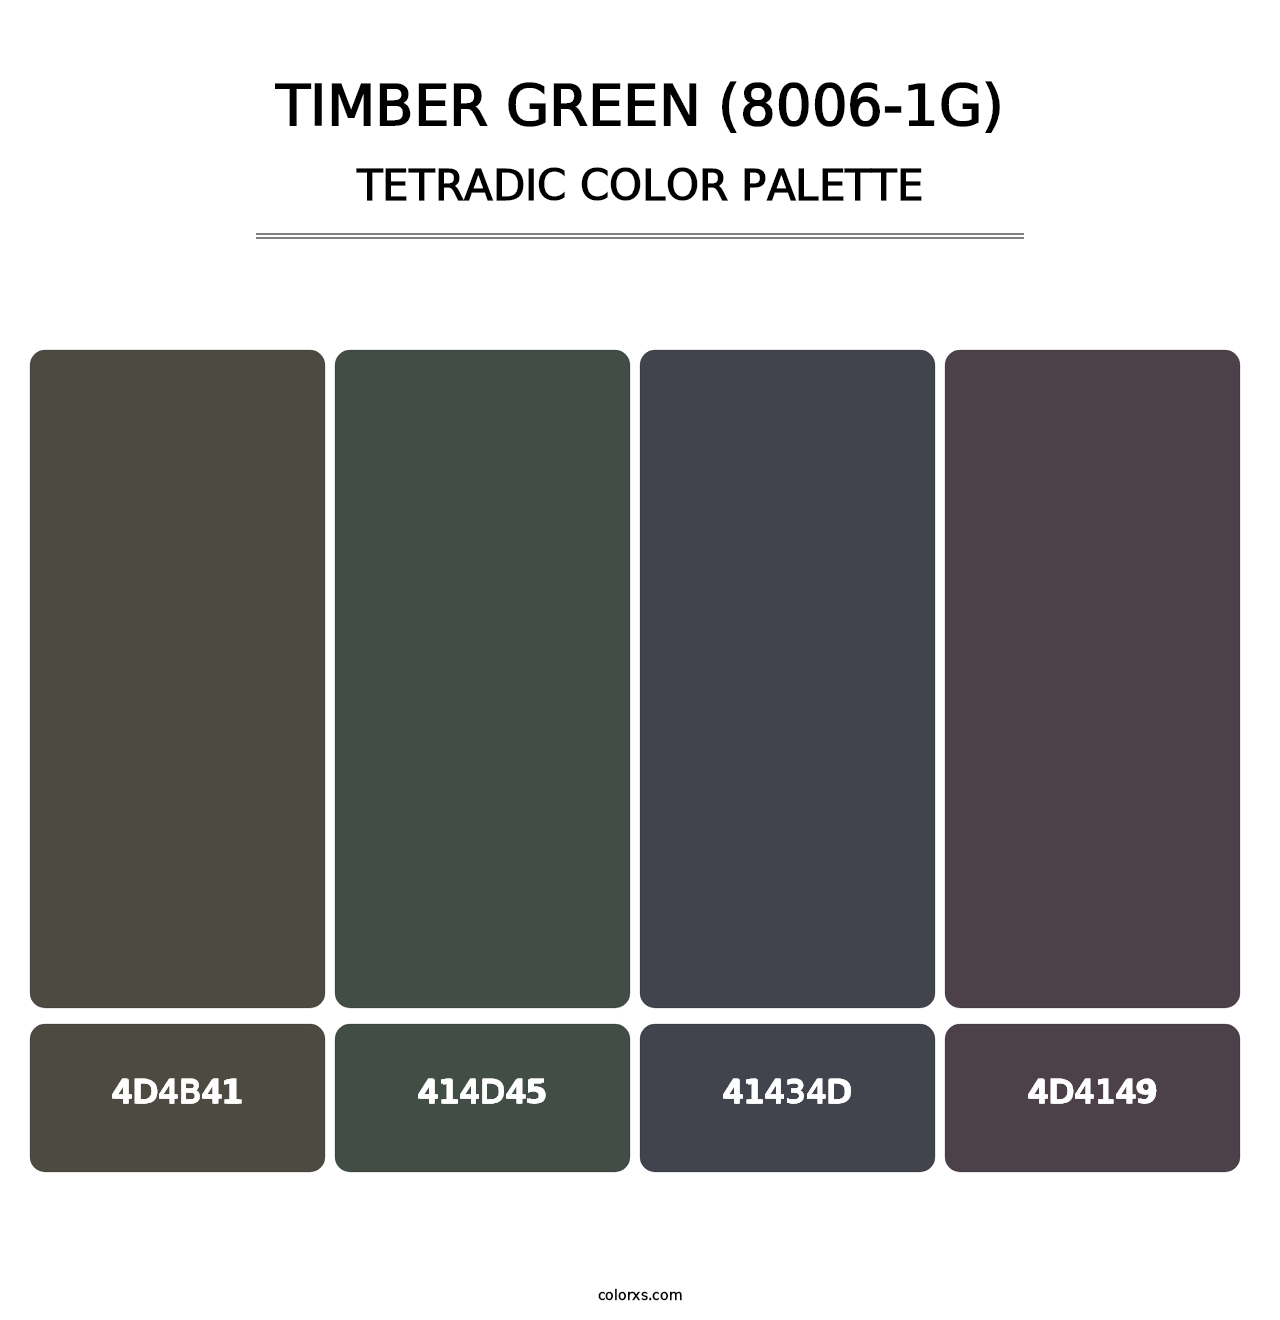 Timber Green (8006-1G) - Tetradic Color Palette